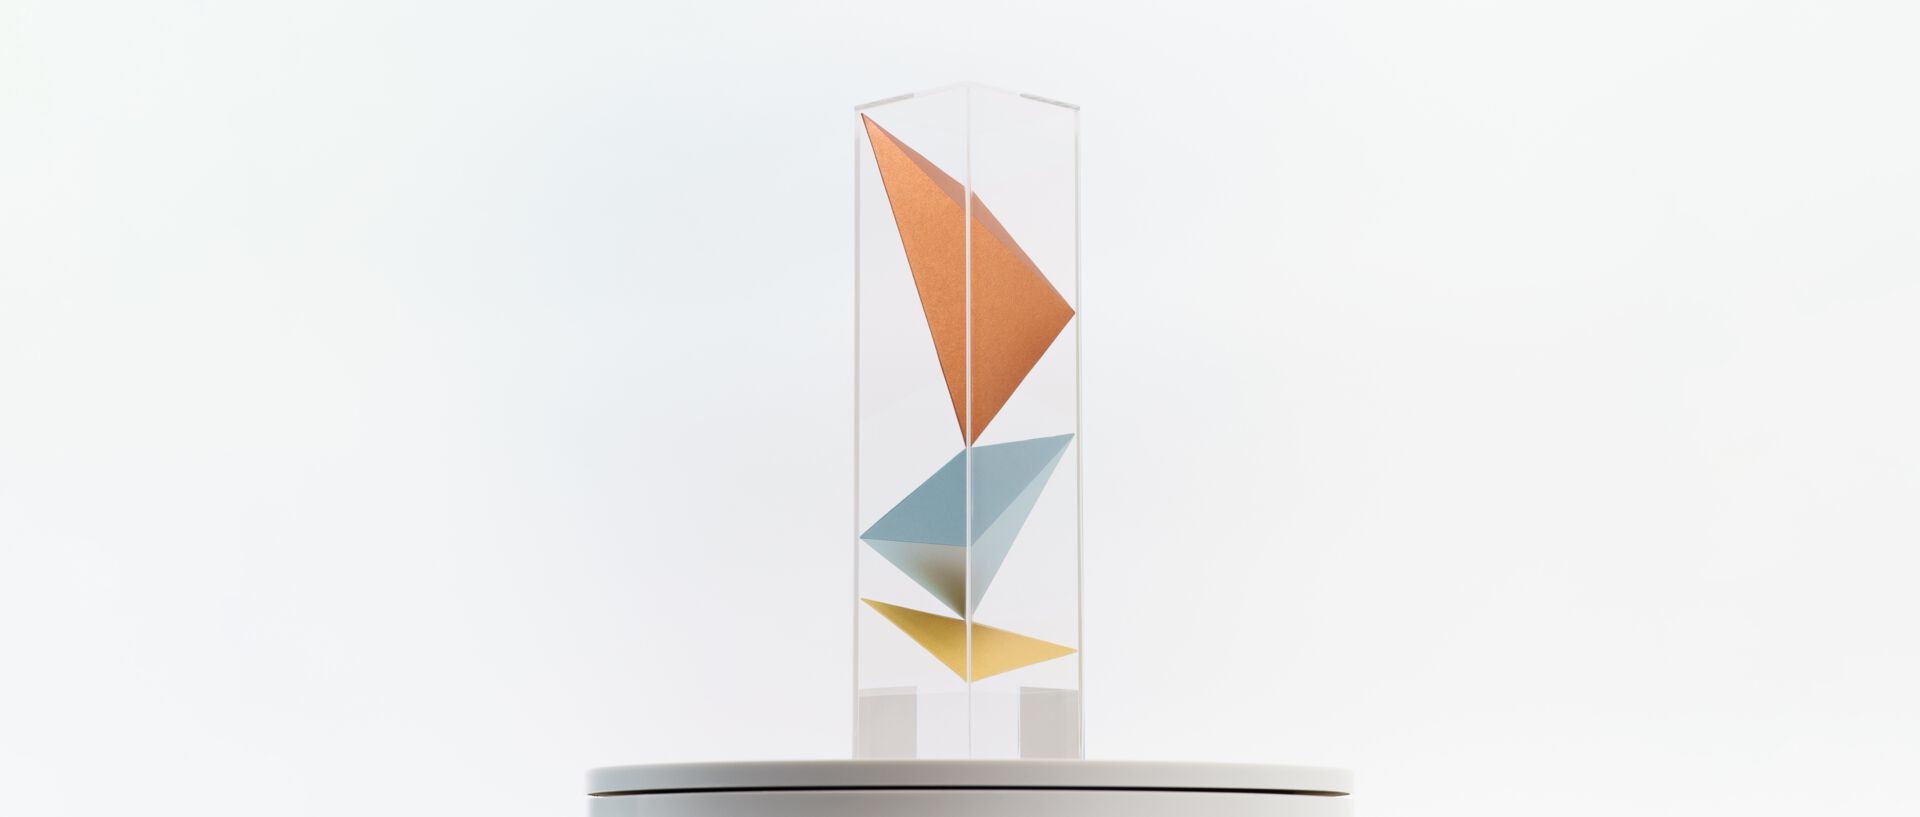 Online Theater Contest Championship Trophy